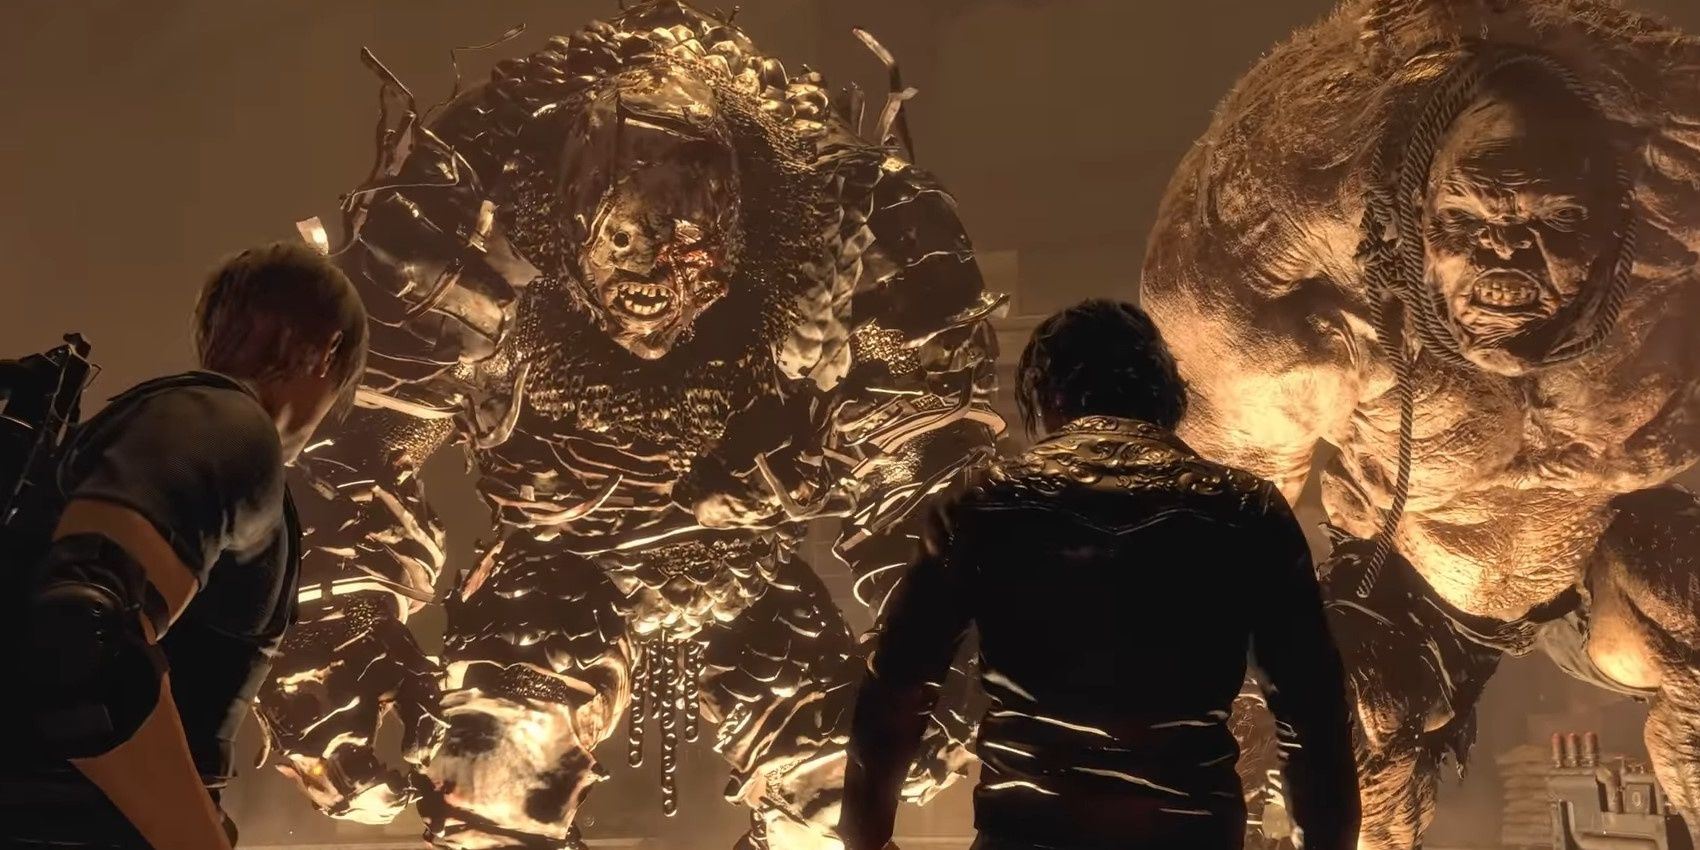 A double El Gigante fight in the Resident Evil 4 remake.